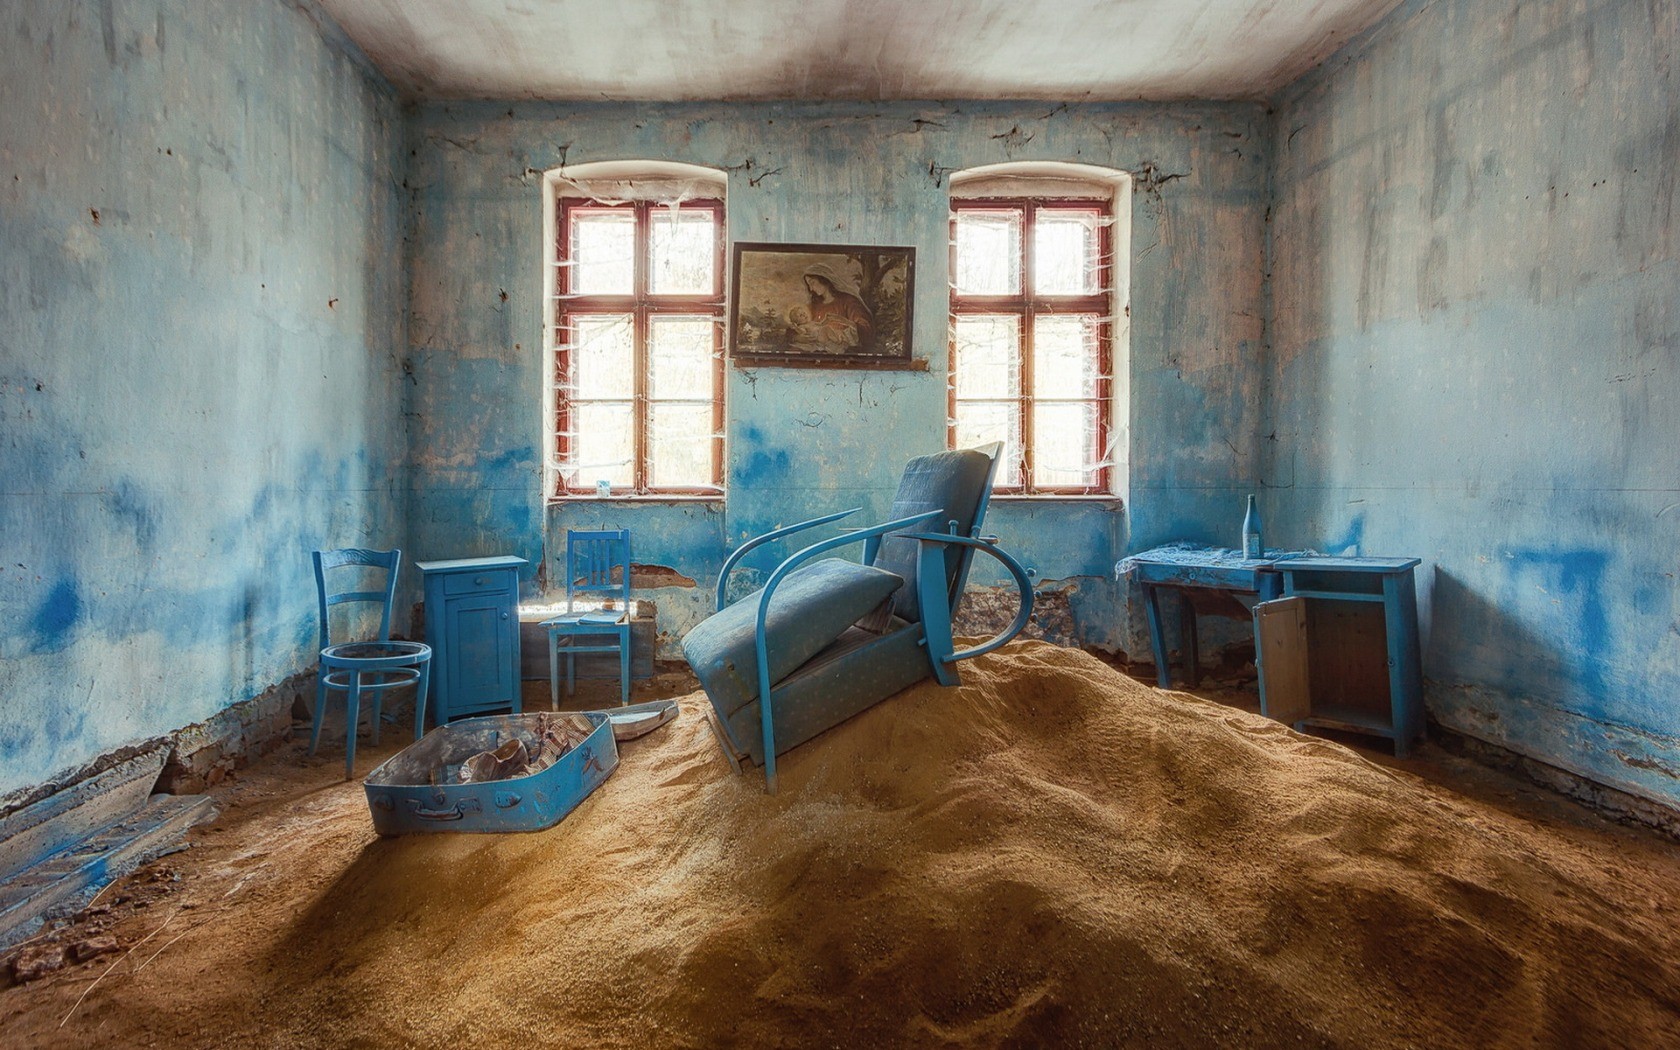 General 1680x1050 sand house interior old abandoned ruins blue indoors